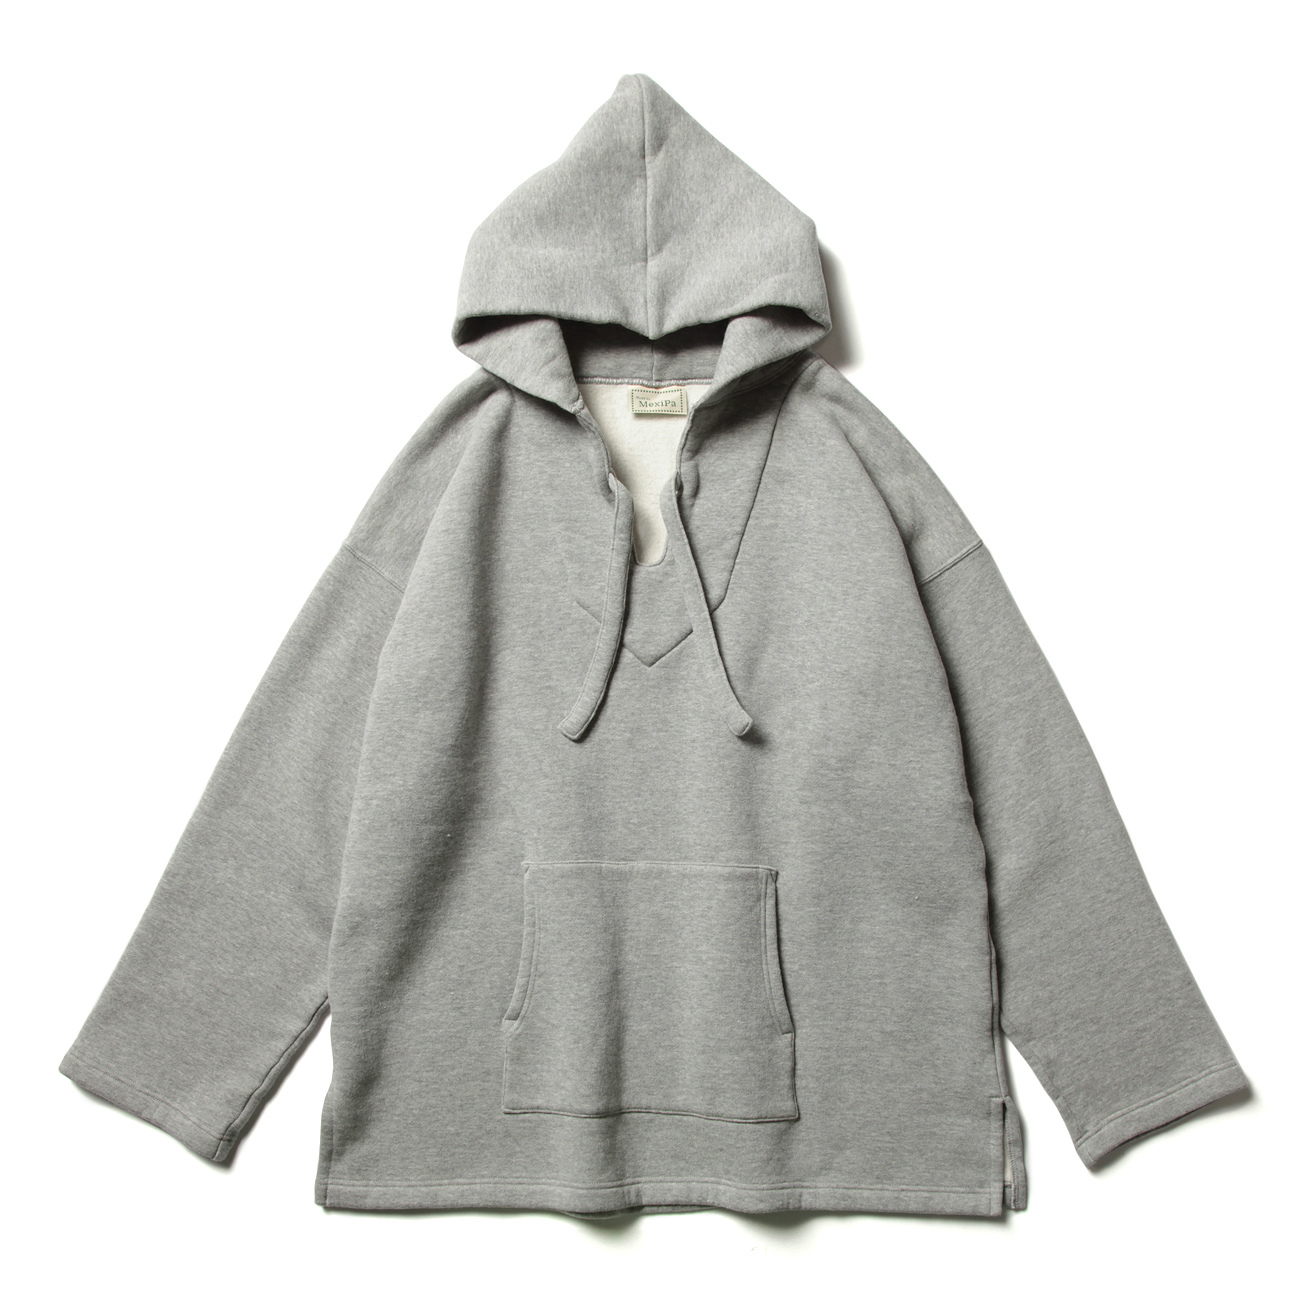 MexiPa / メキパ | Sweat Mexican Parker - Top Gray | 通販 - 正規 